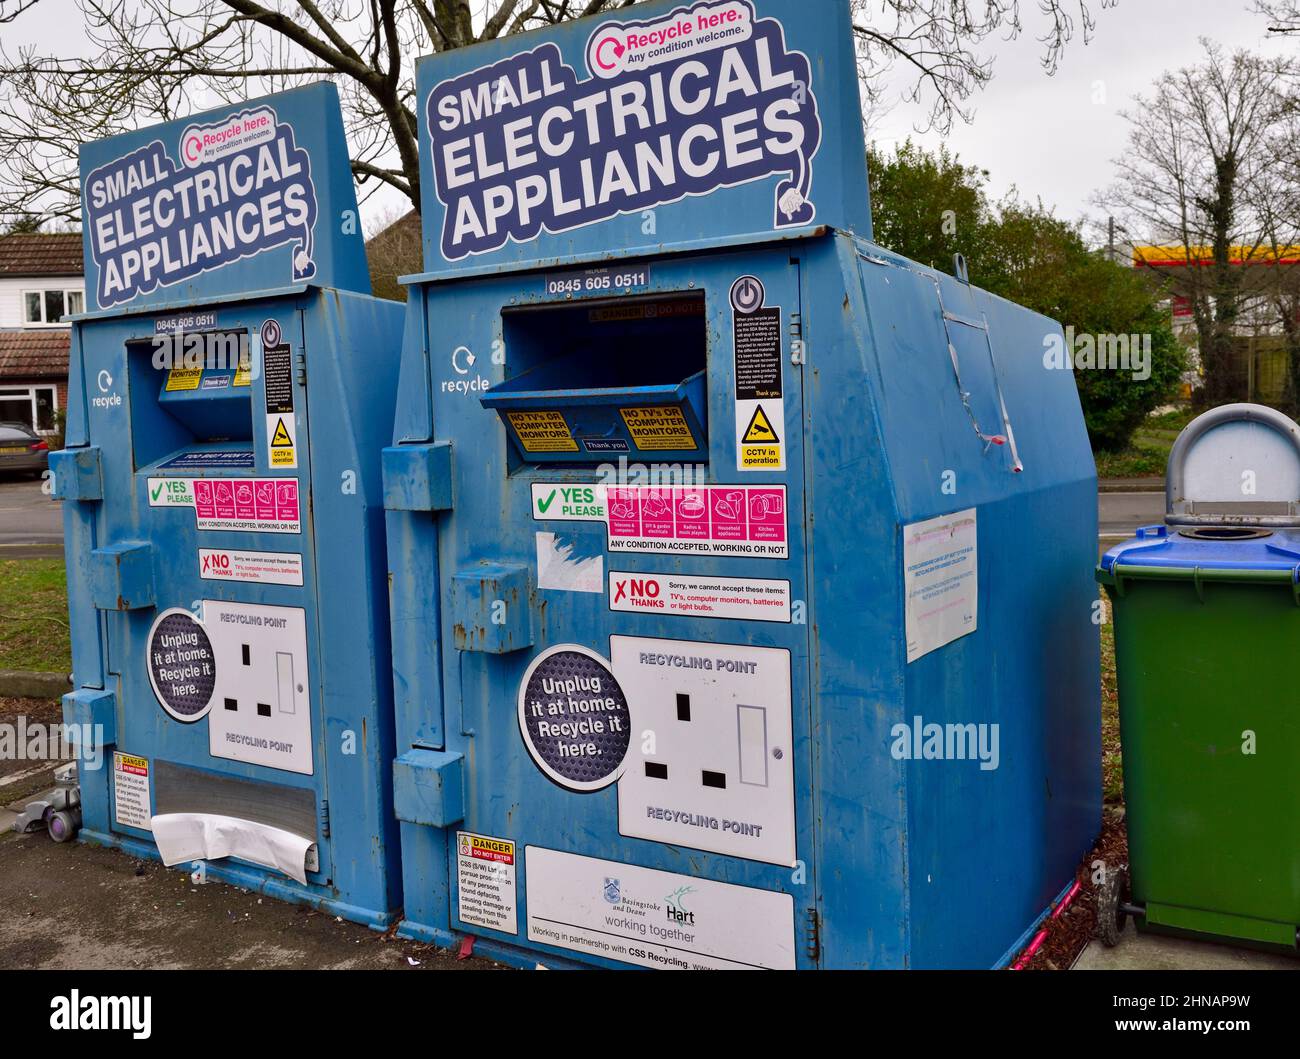 Charity sponsored recycling bins for small electrical appliances Stock Photo